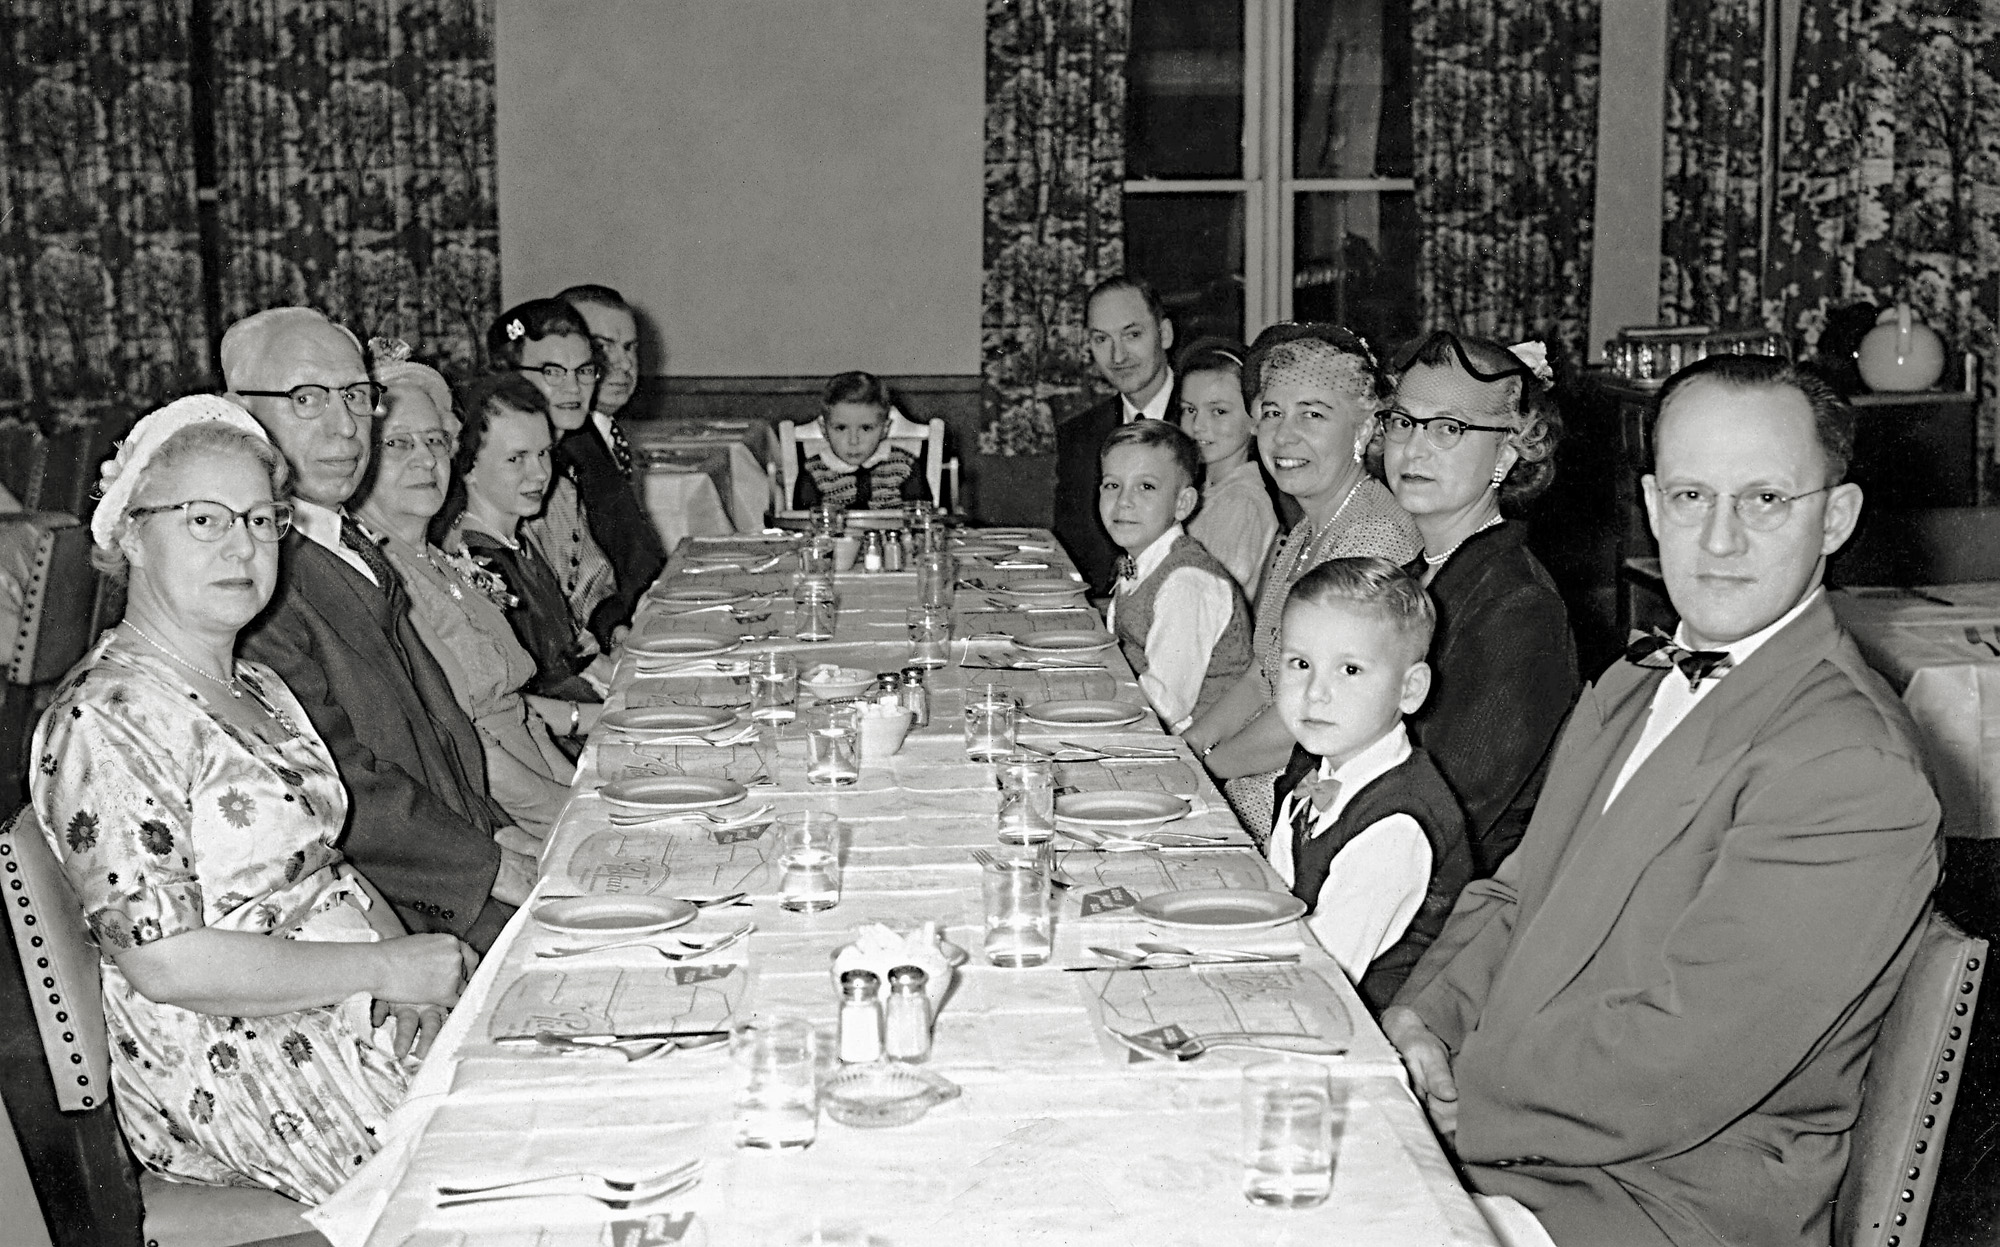 This shot of an extended-family special "dinner out" from 1953 was passed to me by my cousin recently (who is also in this picture), 65 years ago. I'm the high-chair scowling toddler at the far end of the table while my older brothers, parents, cousin, aunt and uncle are on the right. My maternal grandparents, aunts, uncle and cousin are on the left. An uncle took the shot (the funeral director uncle that impressed me as a car-crazed kid with his two 1958 black Cadillacs for his business, one of them seen here.

This was apparently a very special dinner out, as we almost never went out for meals as a kid or teenager. View full size.